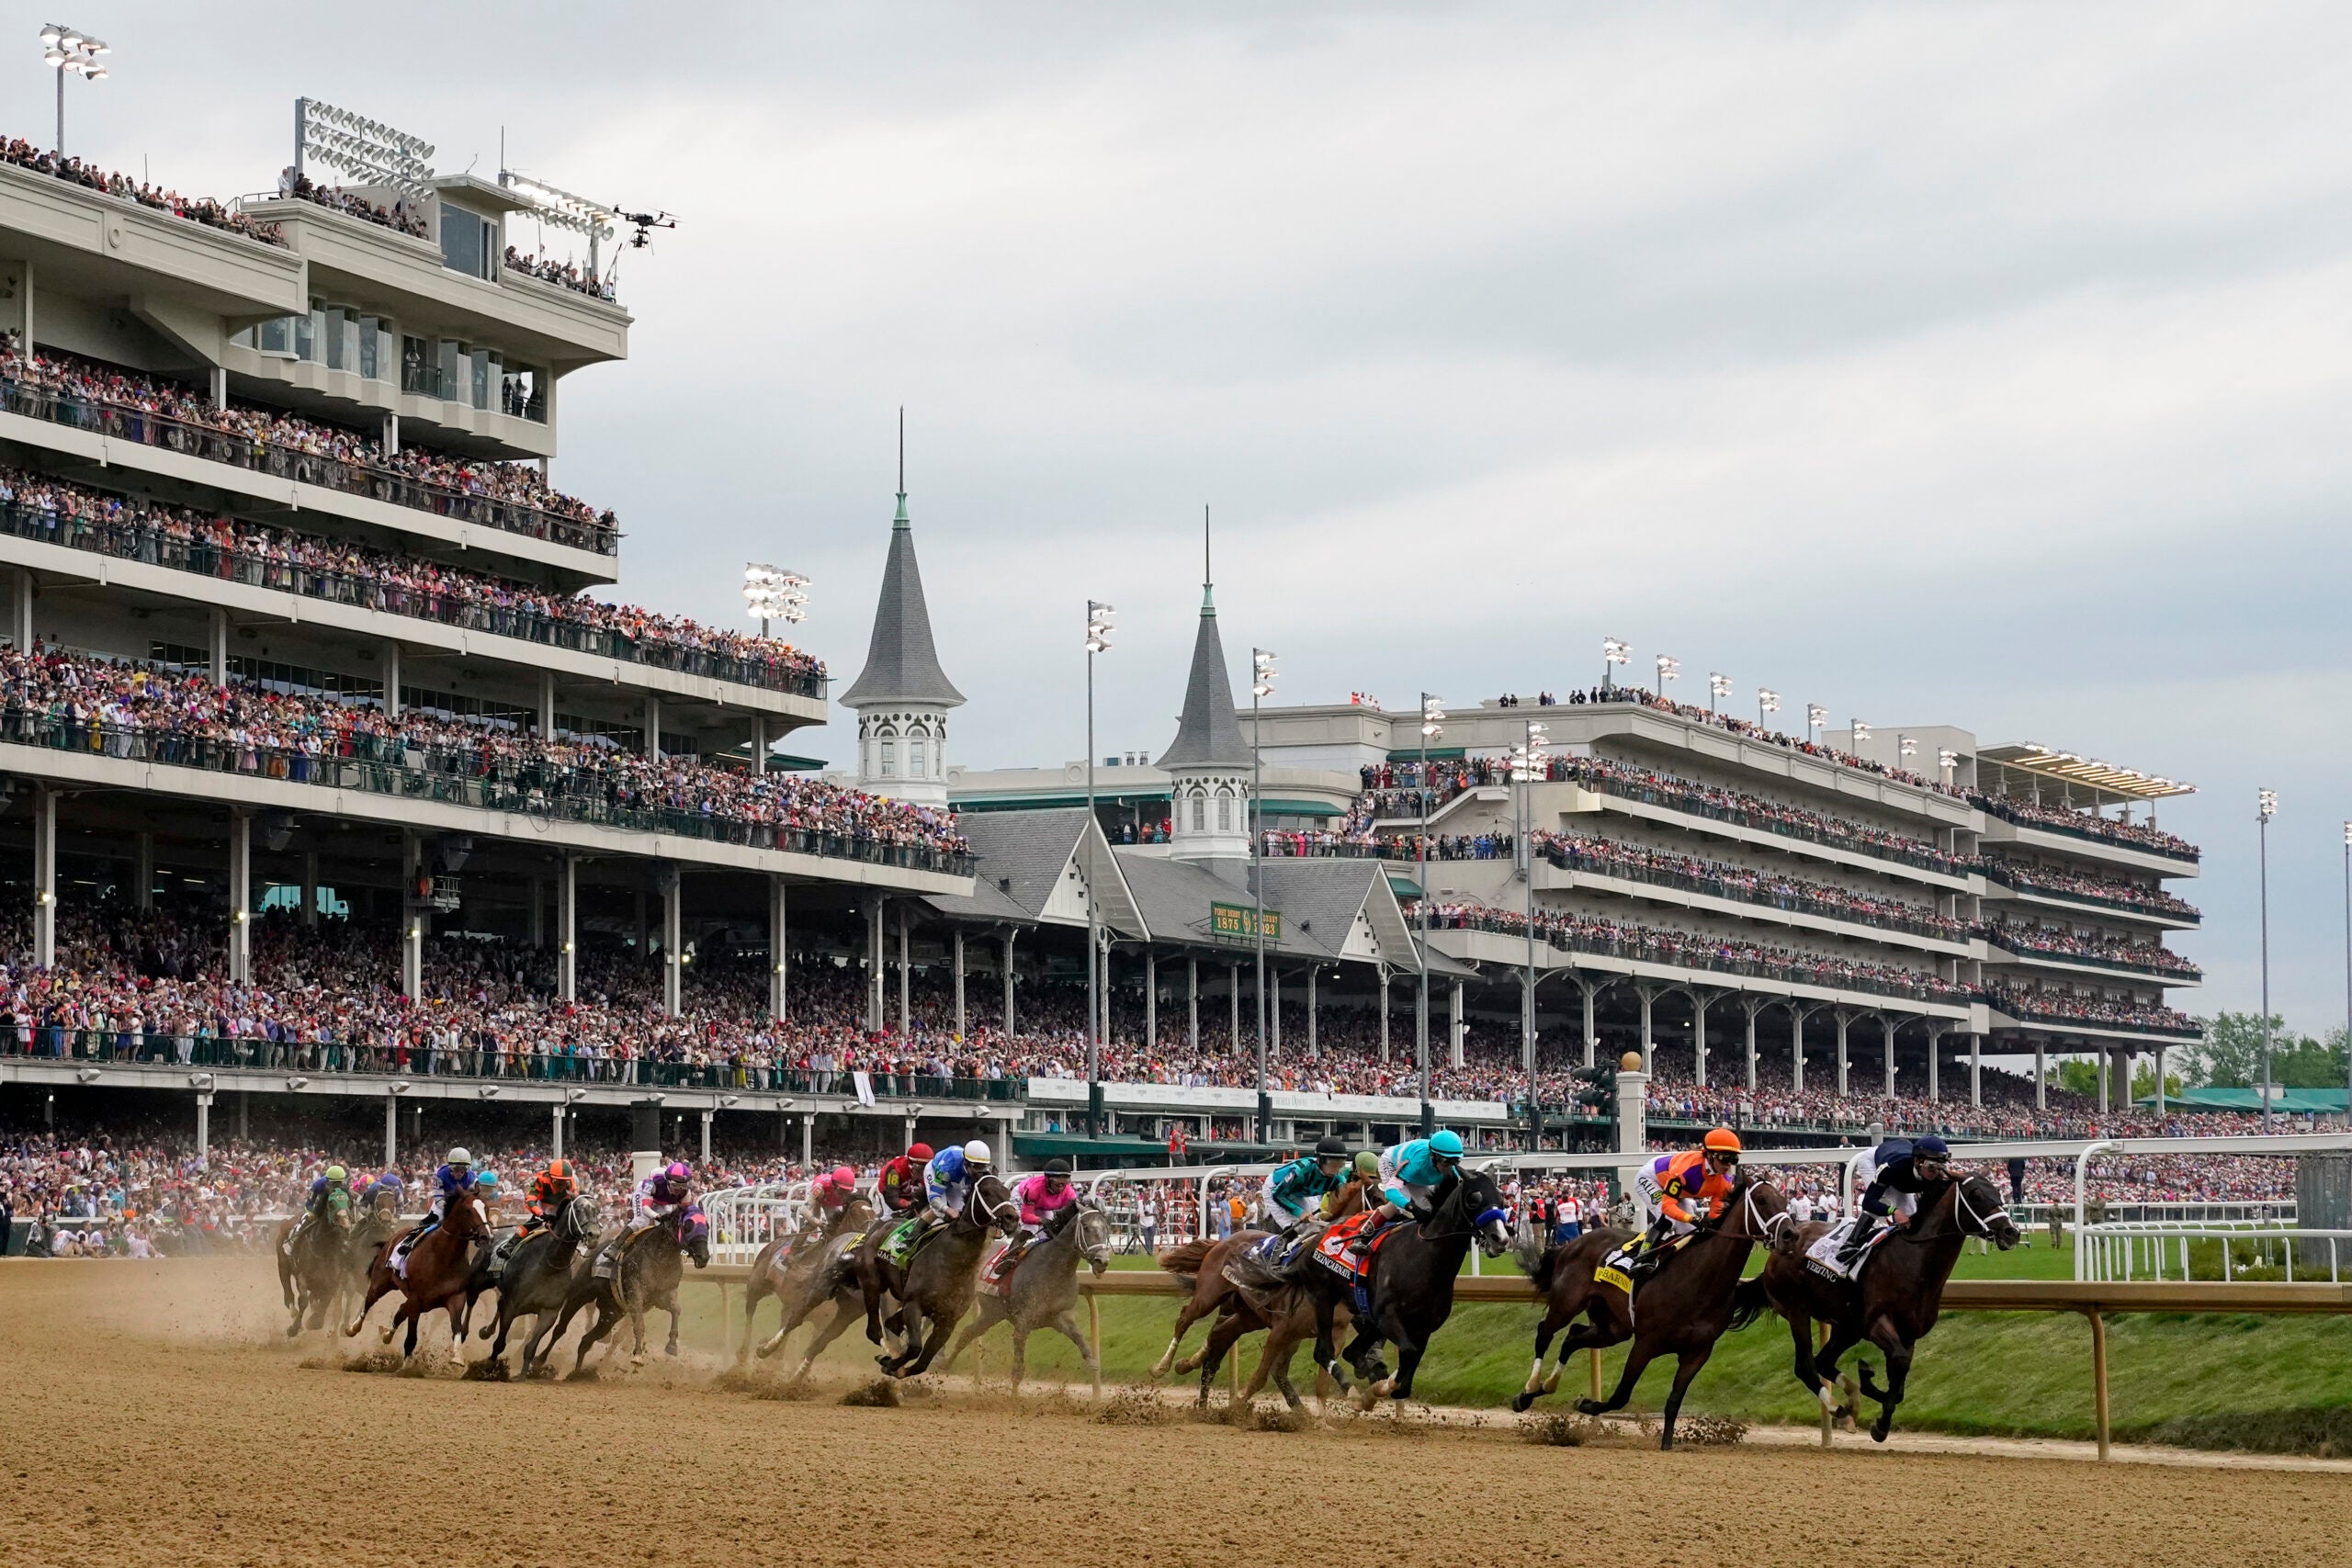 Horses come through the first turn during the 149th running of the Kentucky Derby horse race at Churchill Downs in Louisville, Ky.